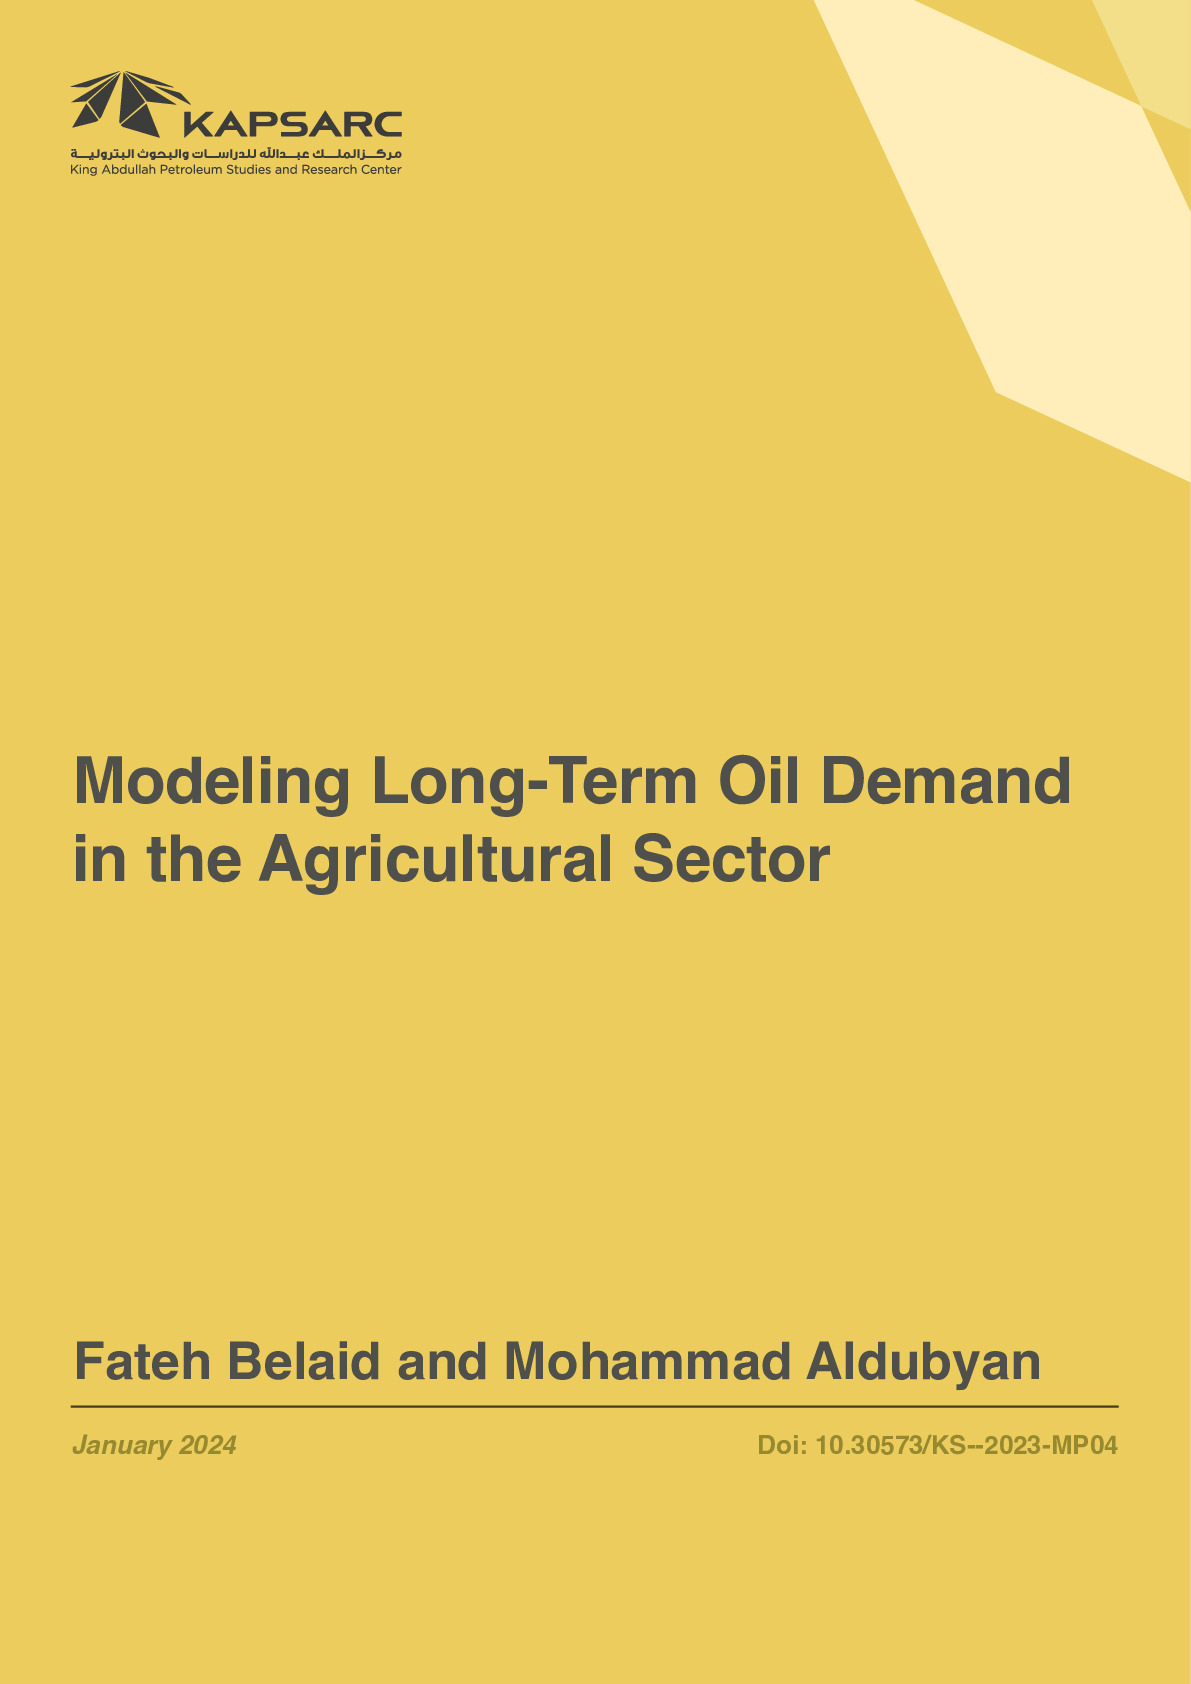 Modeling Long-Term Oil Demand in the Agricultural Sector